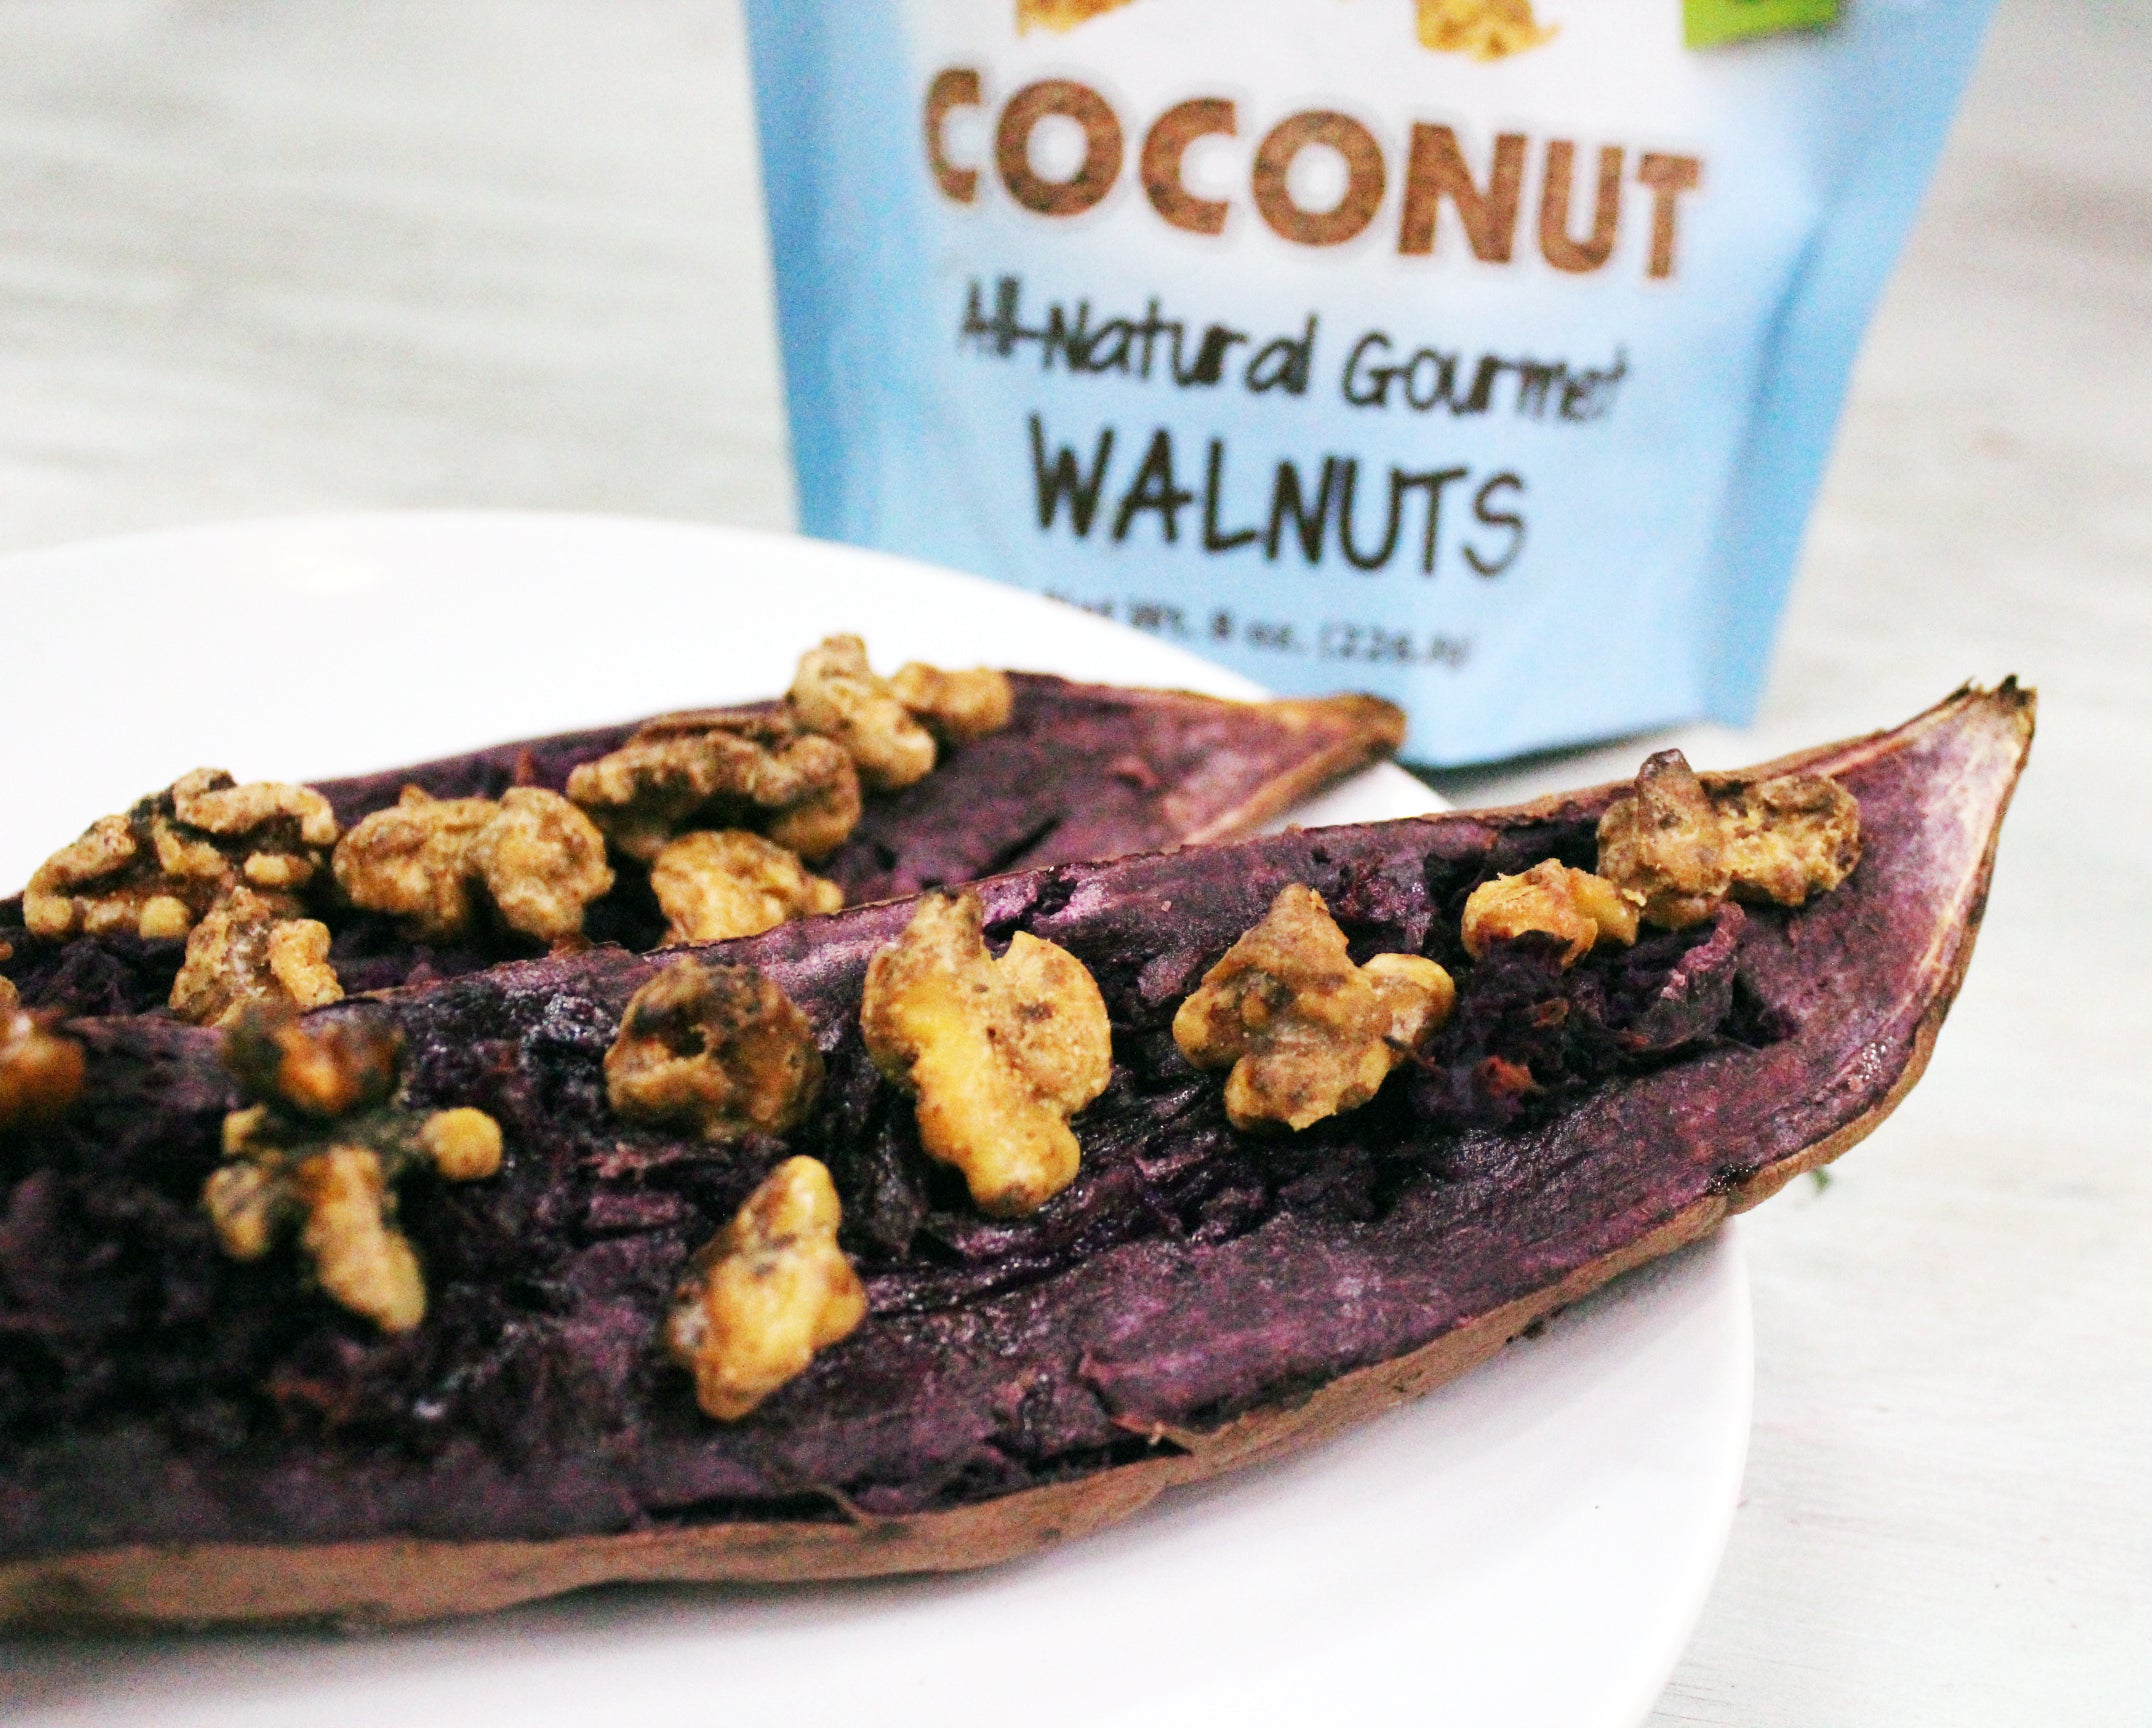 Purple baked potatoes topped with coconut coated walnut snacks